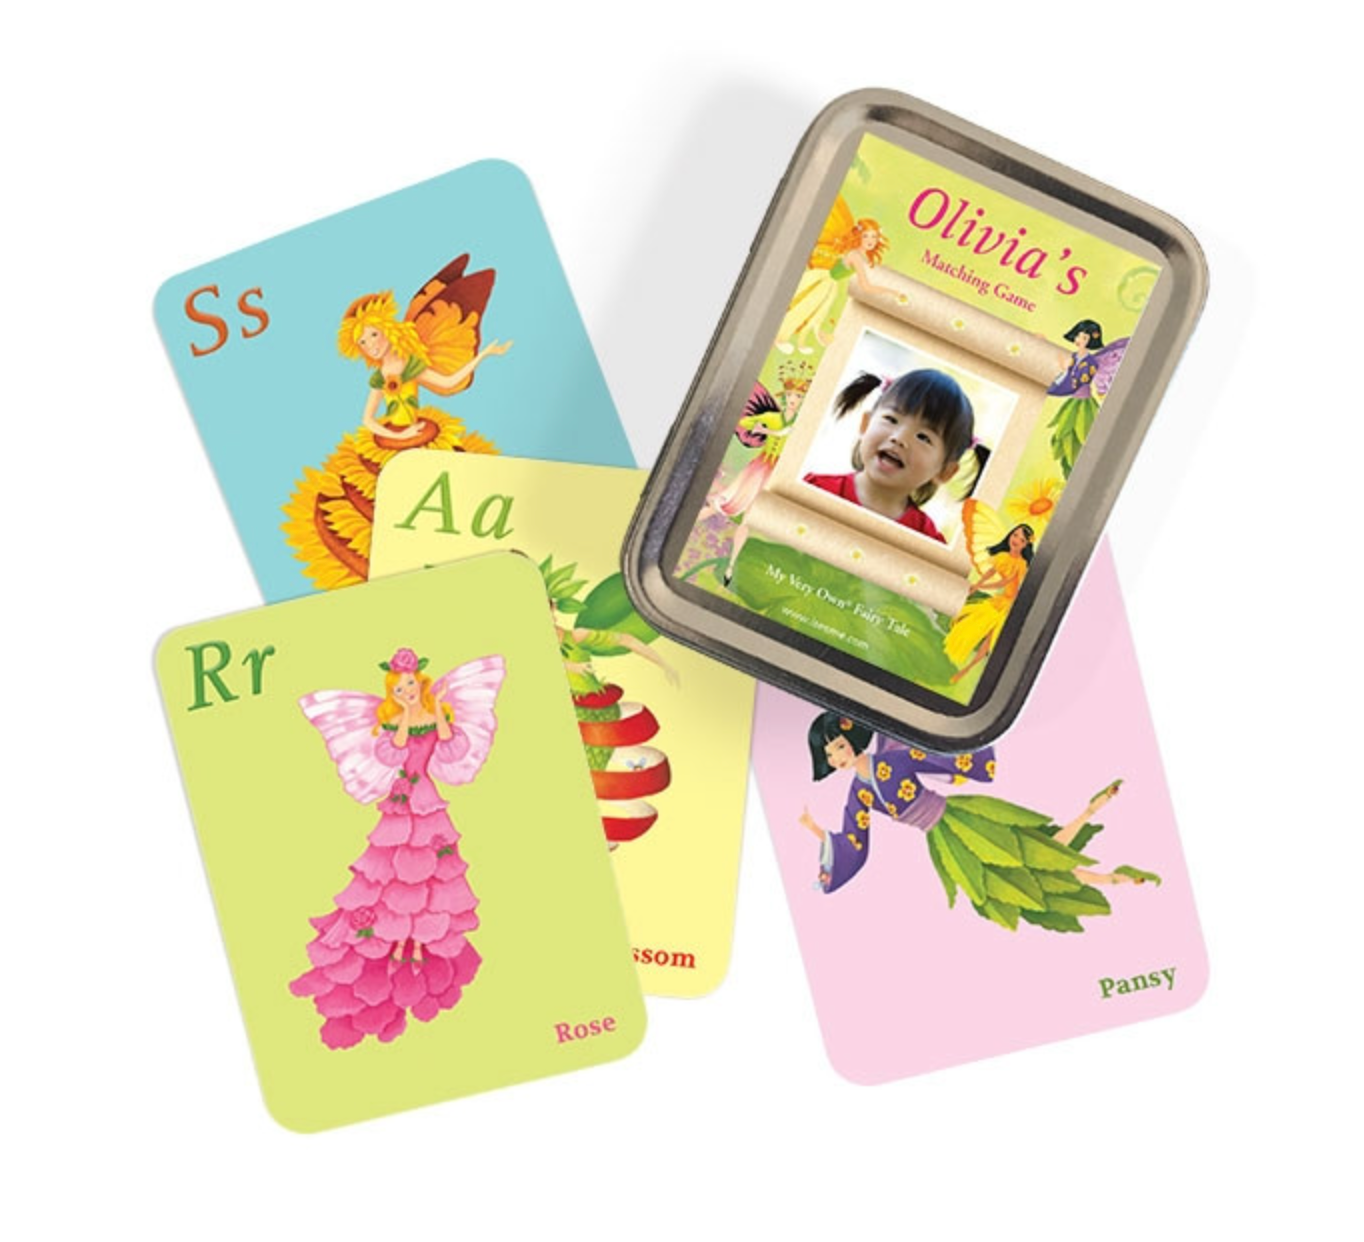 Personalized Matching Game - Fairy Tale